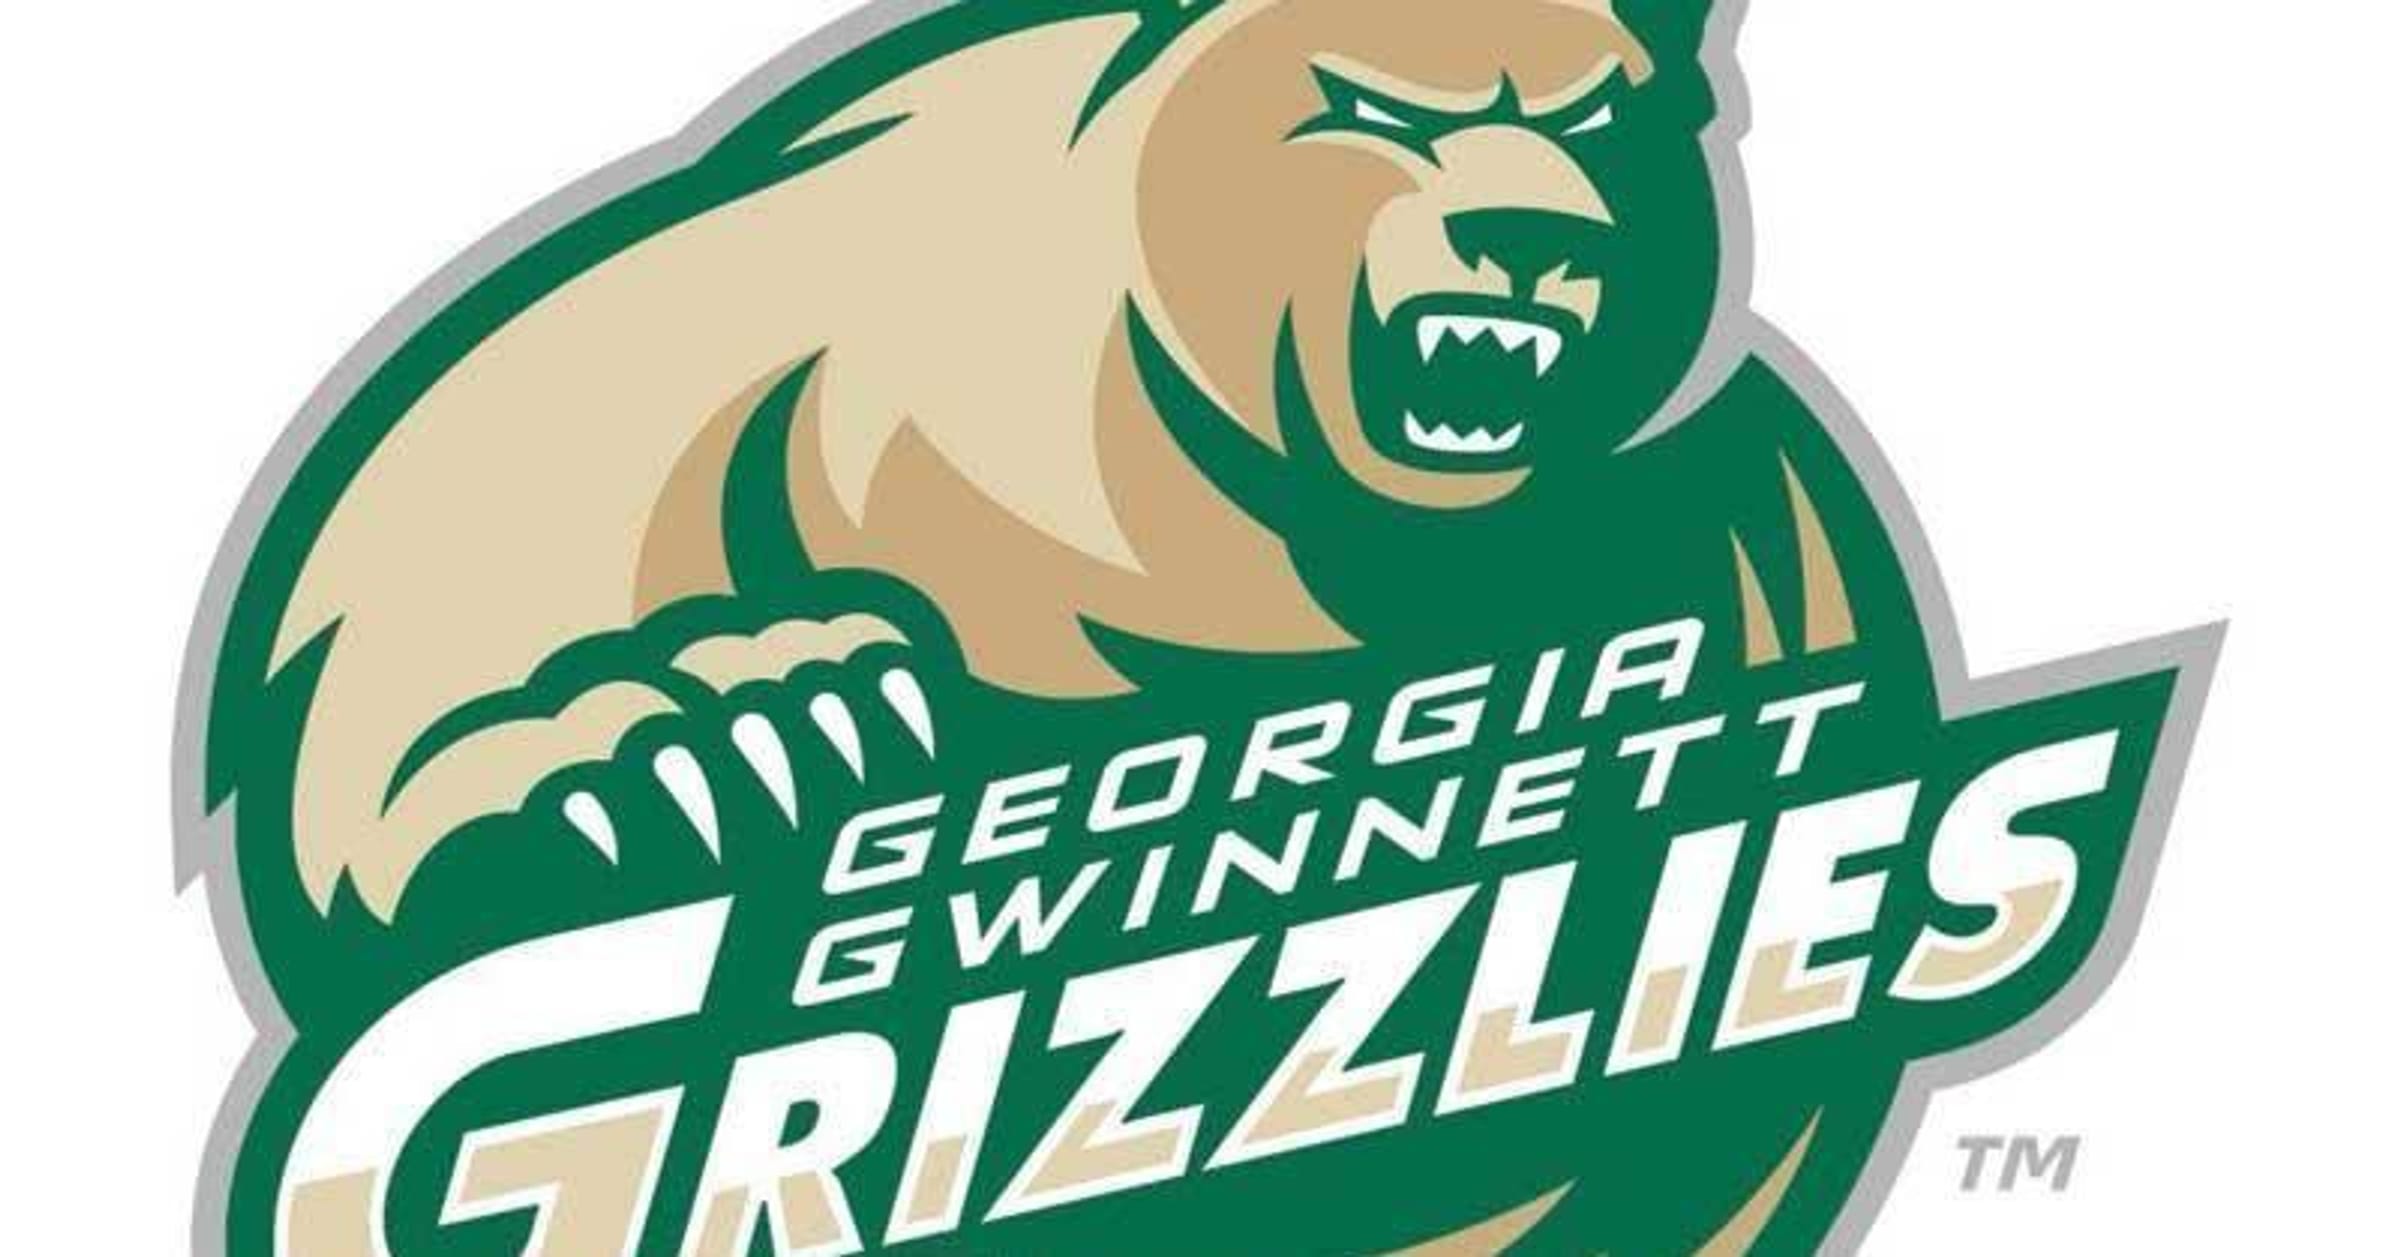 grizzly bear mascot